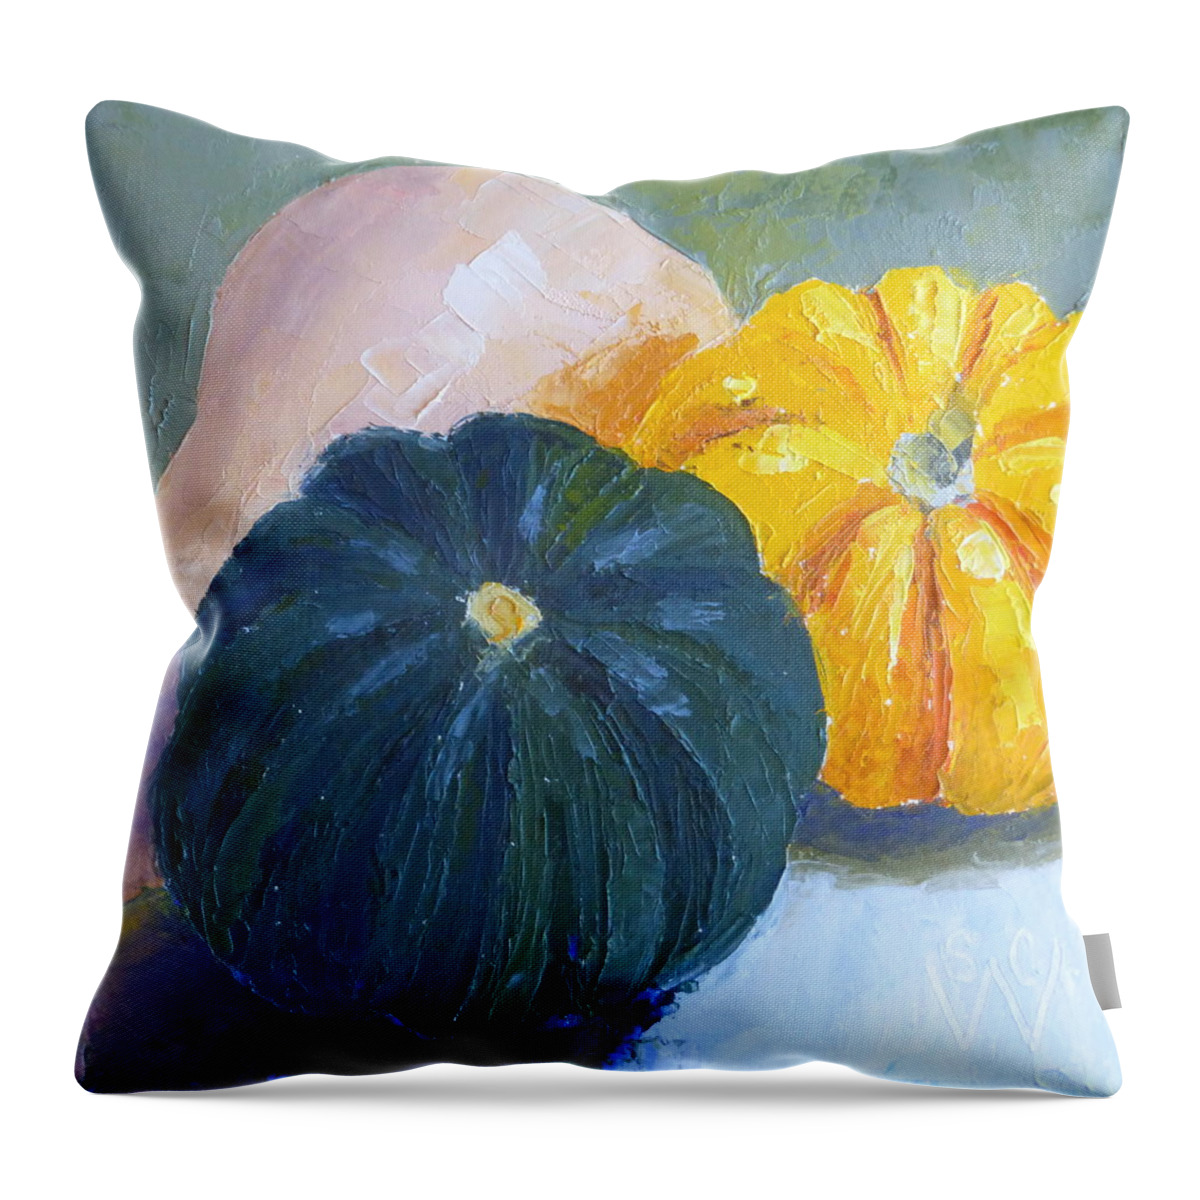 Oil Painting Throw Pillow featuring the painting Squash Trio by Susan Woodward